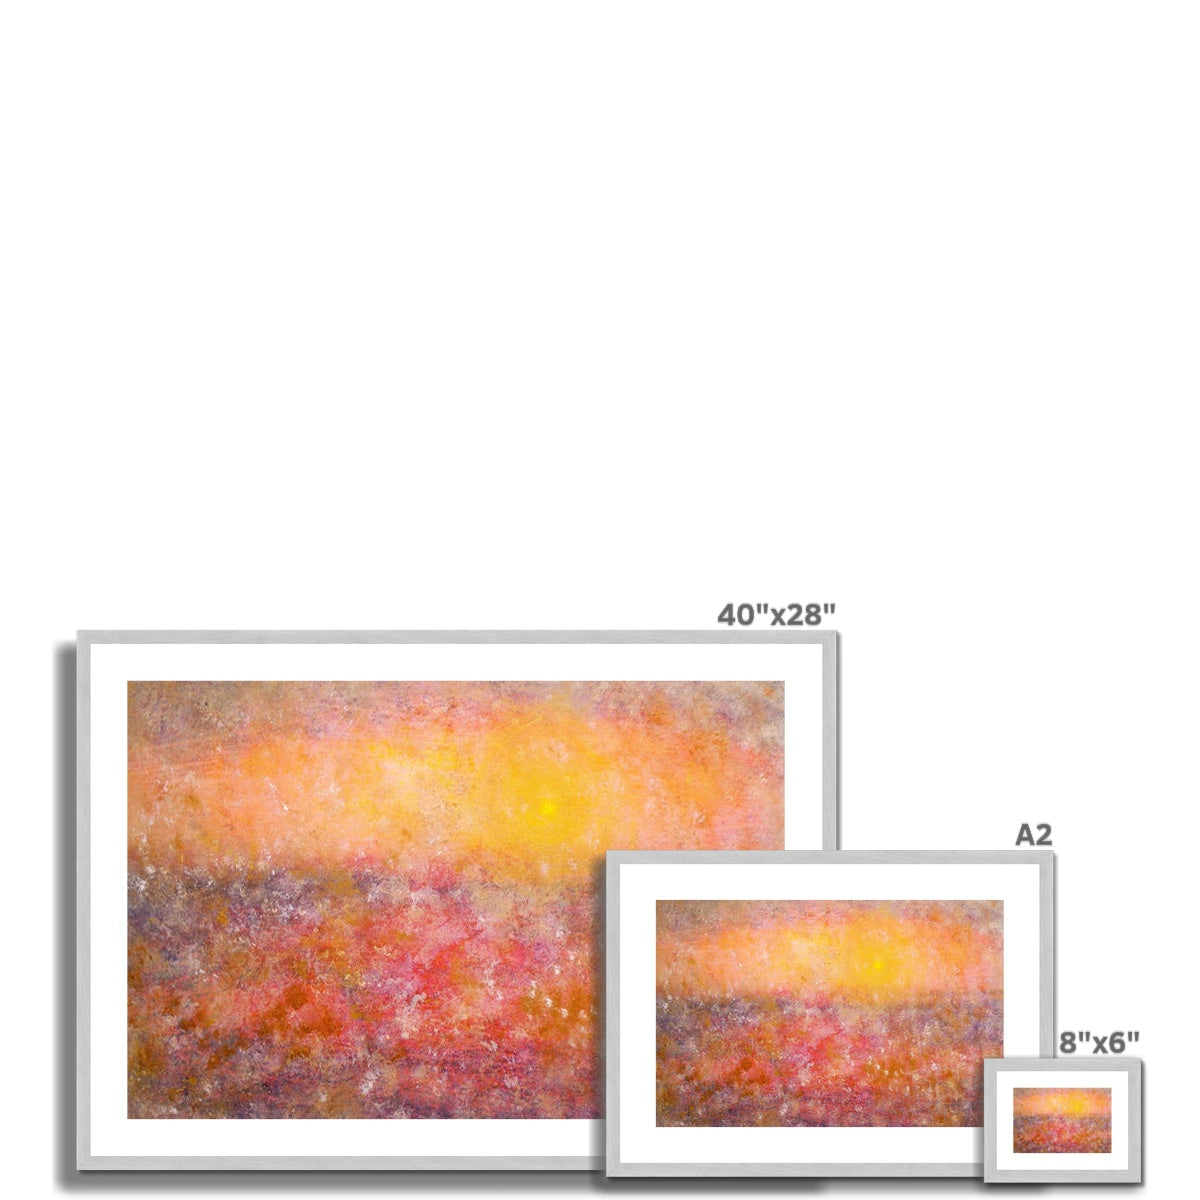 Sunrise Mist Horizon Abstract Painting | Antique Framed & Mounted Prints From Scotland-Antique Framed & Mounted Prints-Abstract & Impressionistic Art Gallery-Paintings, Prints, Homeware, Art Gifts From Scotland By Scottish Artist Kevin Hunter